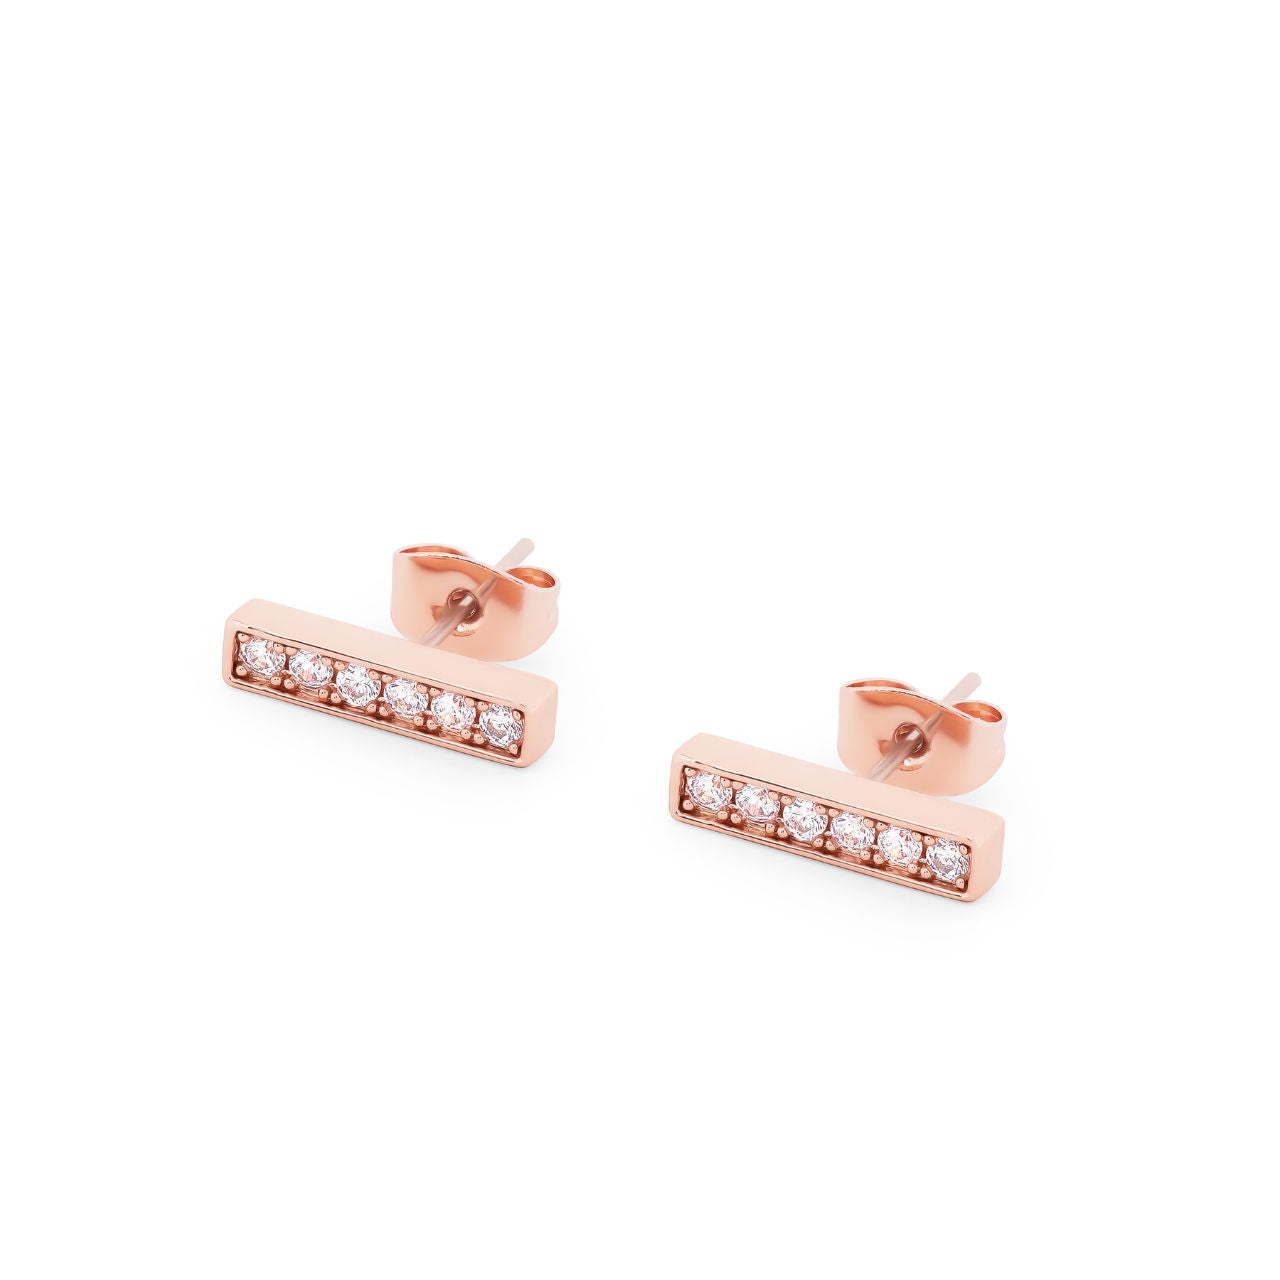 T-Bar Stud Earrings Rose Gold Set With CZ by Tipperary  These exquisite Tipperary T-Bar Stud Earrings are crafted from rose gold and set with twinkling Cubic Zirconias. These timeless pieces will add a touch of elegance to any outfit.